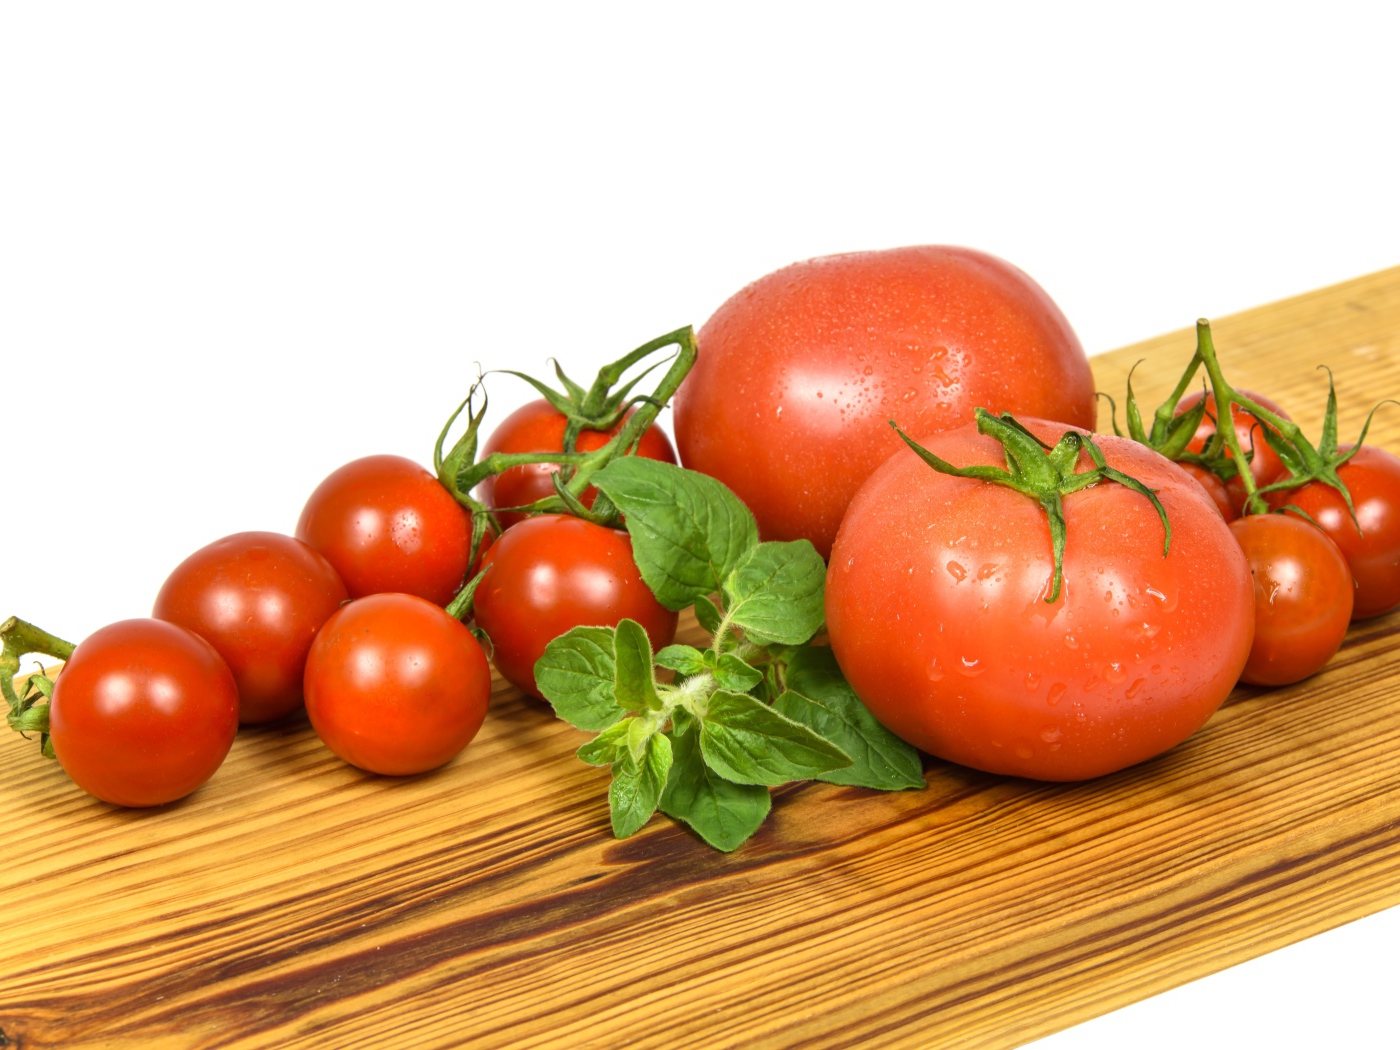 Small and large tomatoes on a wooden board